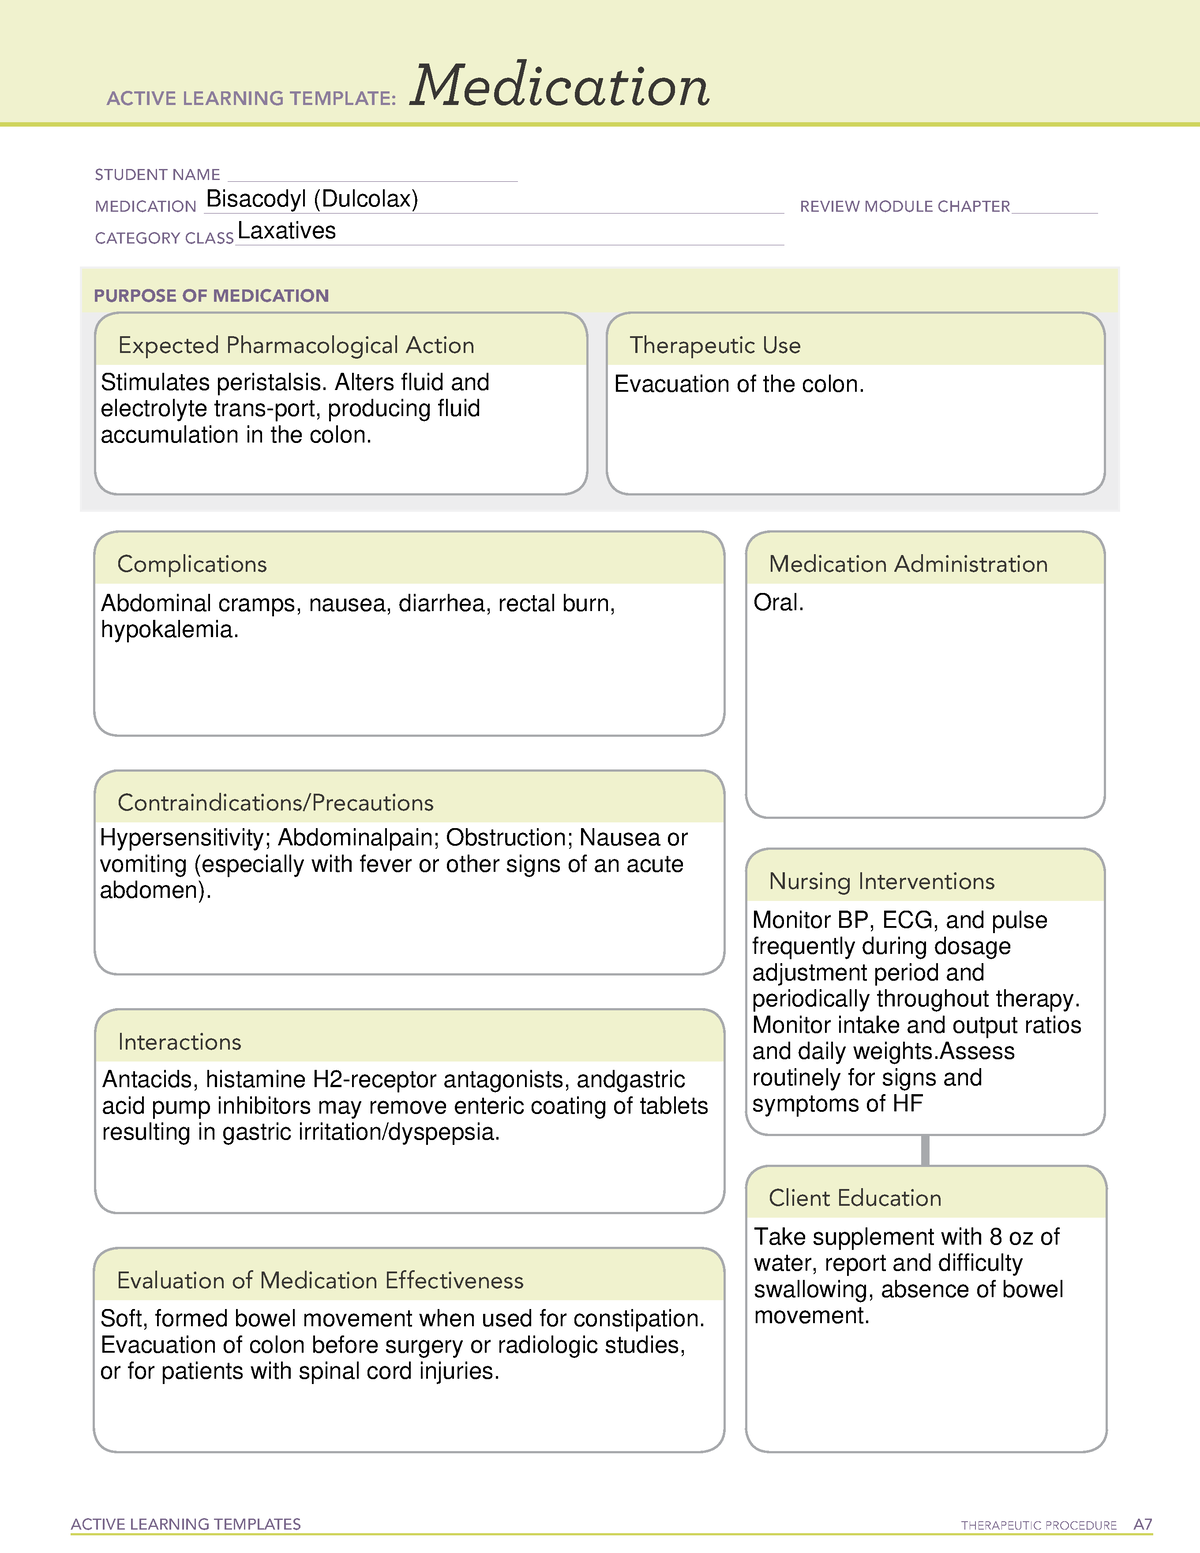 bisacodyl-dulcolax-med-list-active-learning-templates-therapeutic